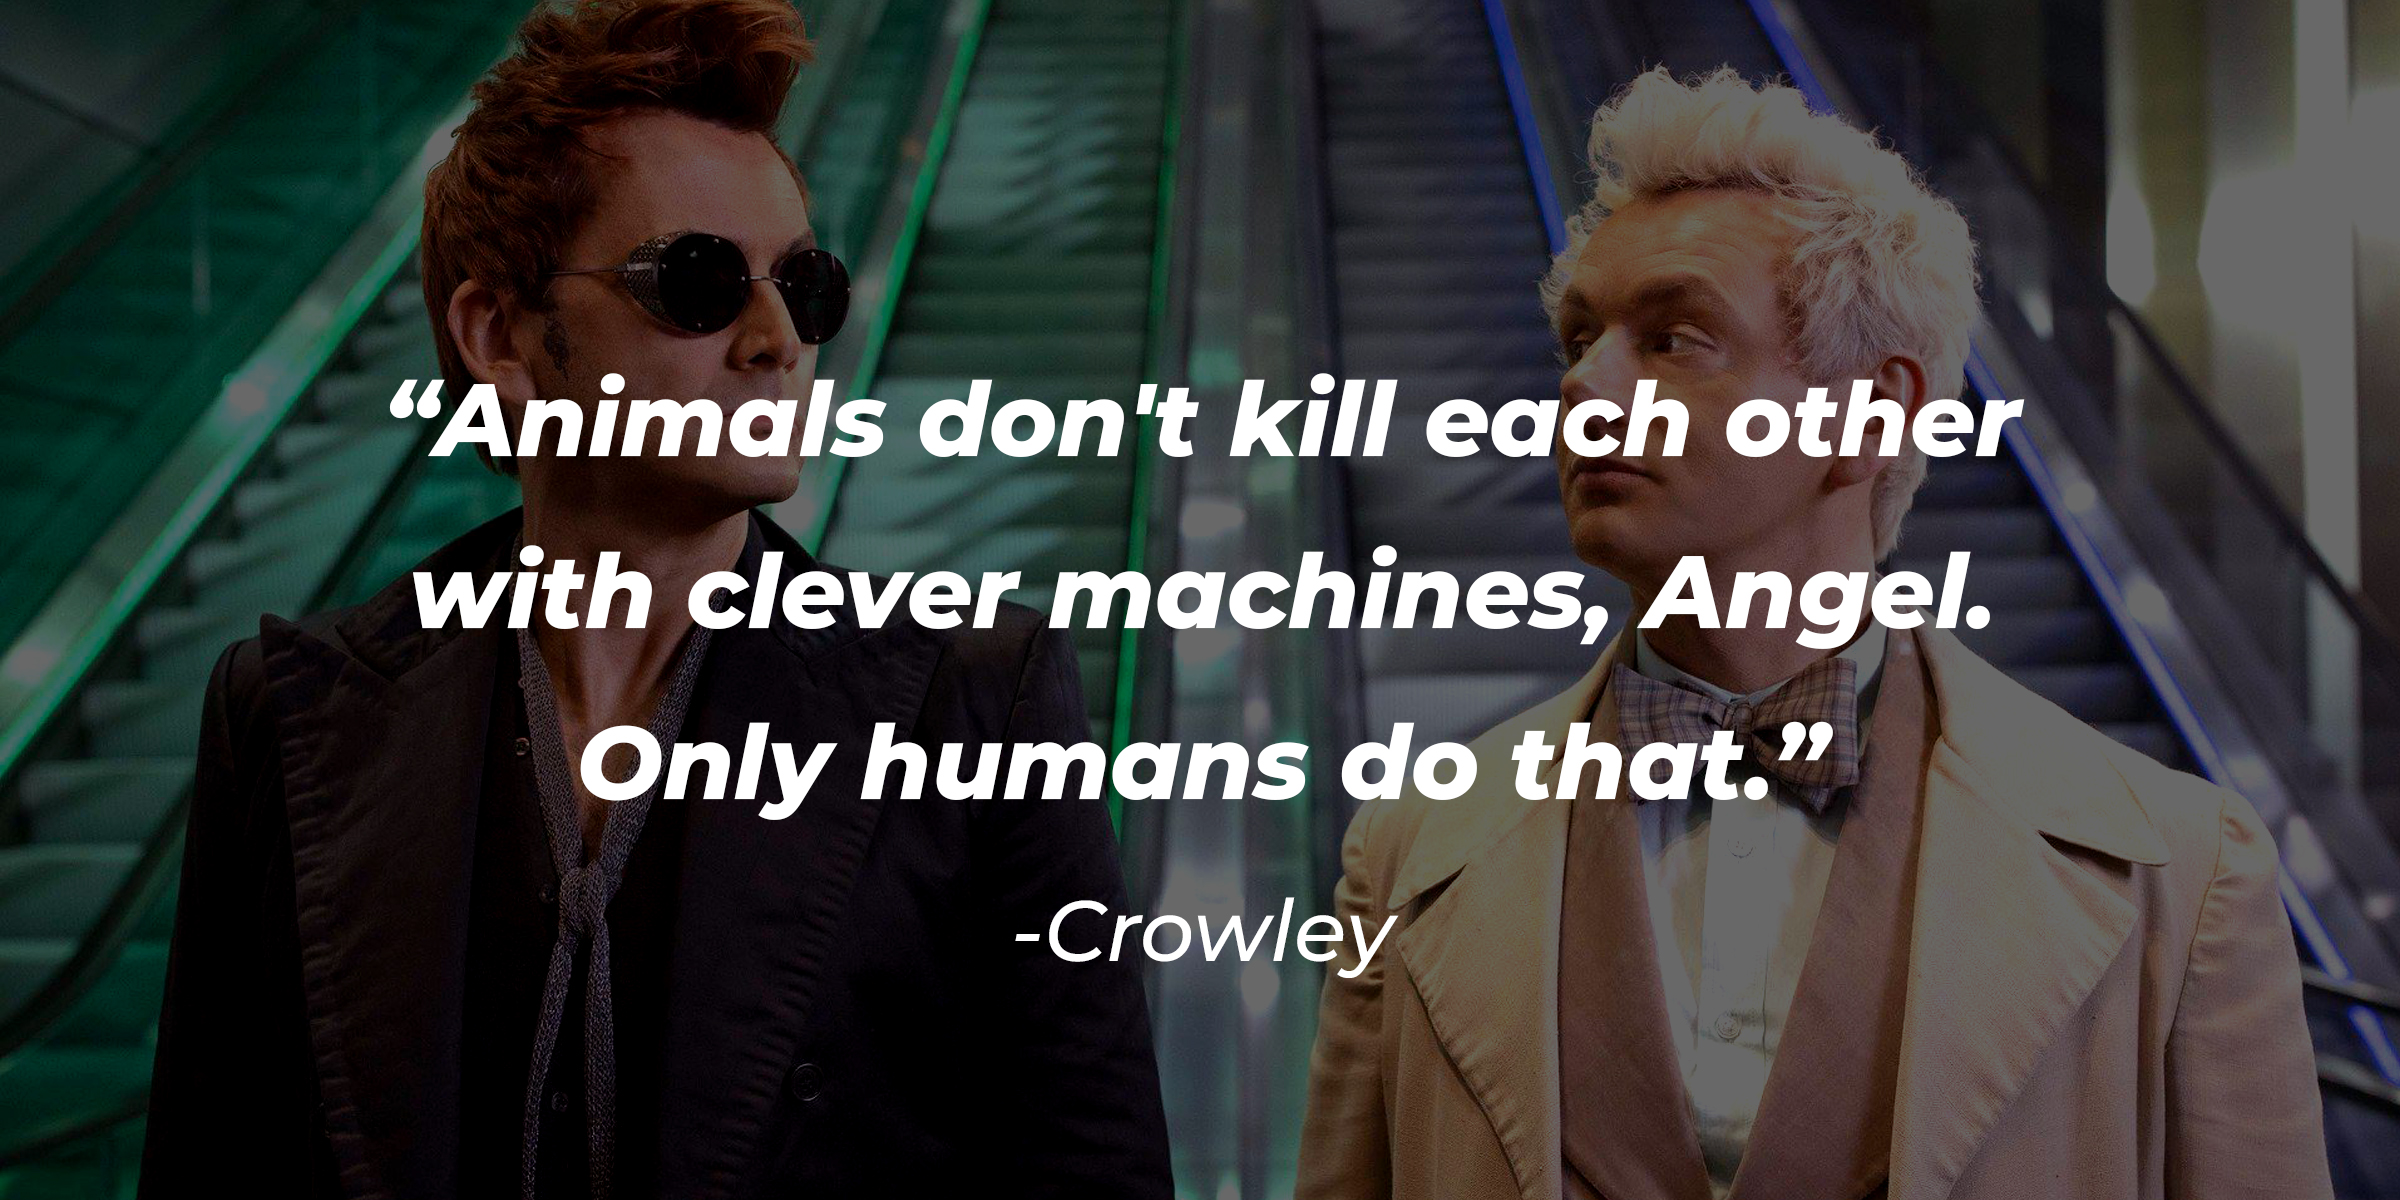 Crowley's quote: "Animals don't kill each other with clever machines, Angel. Only humans do that." | Source: Facebook.com/goodomensprime